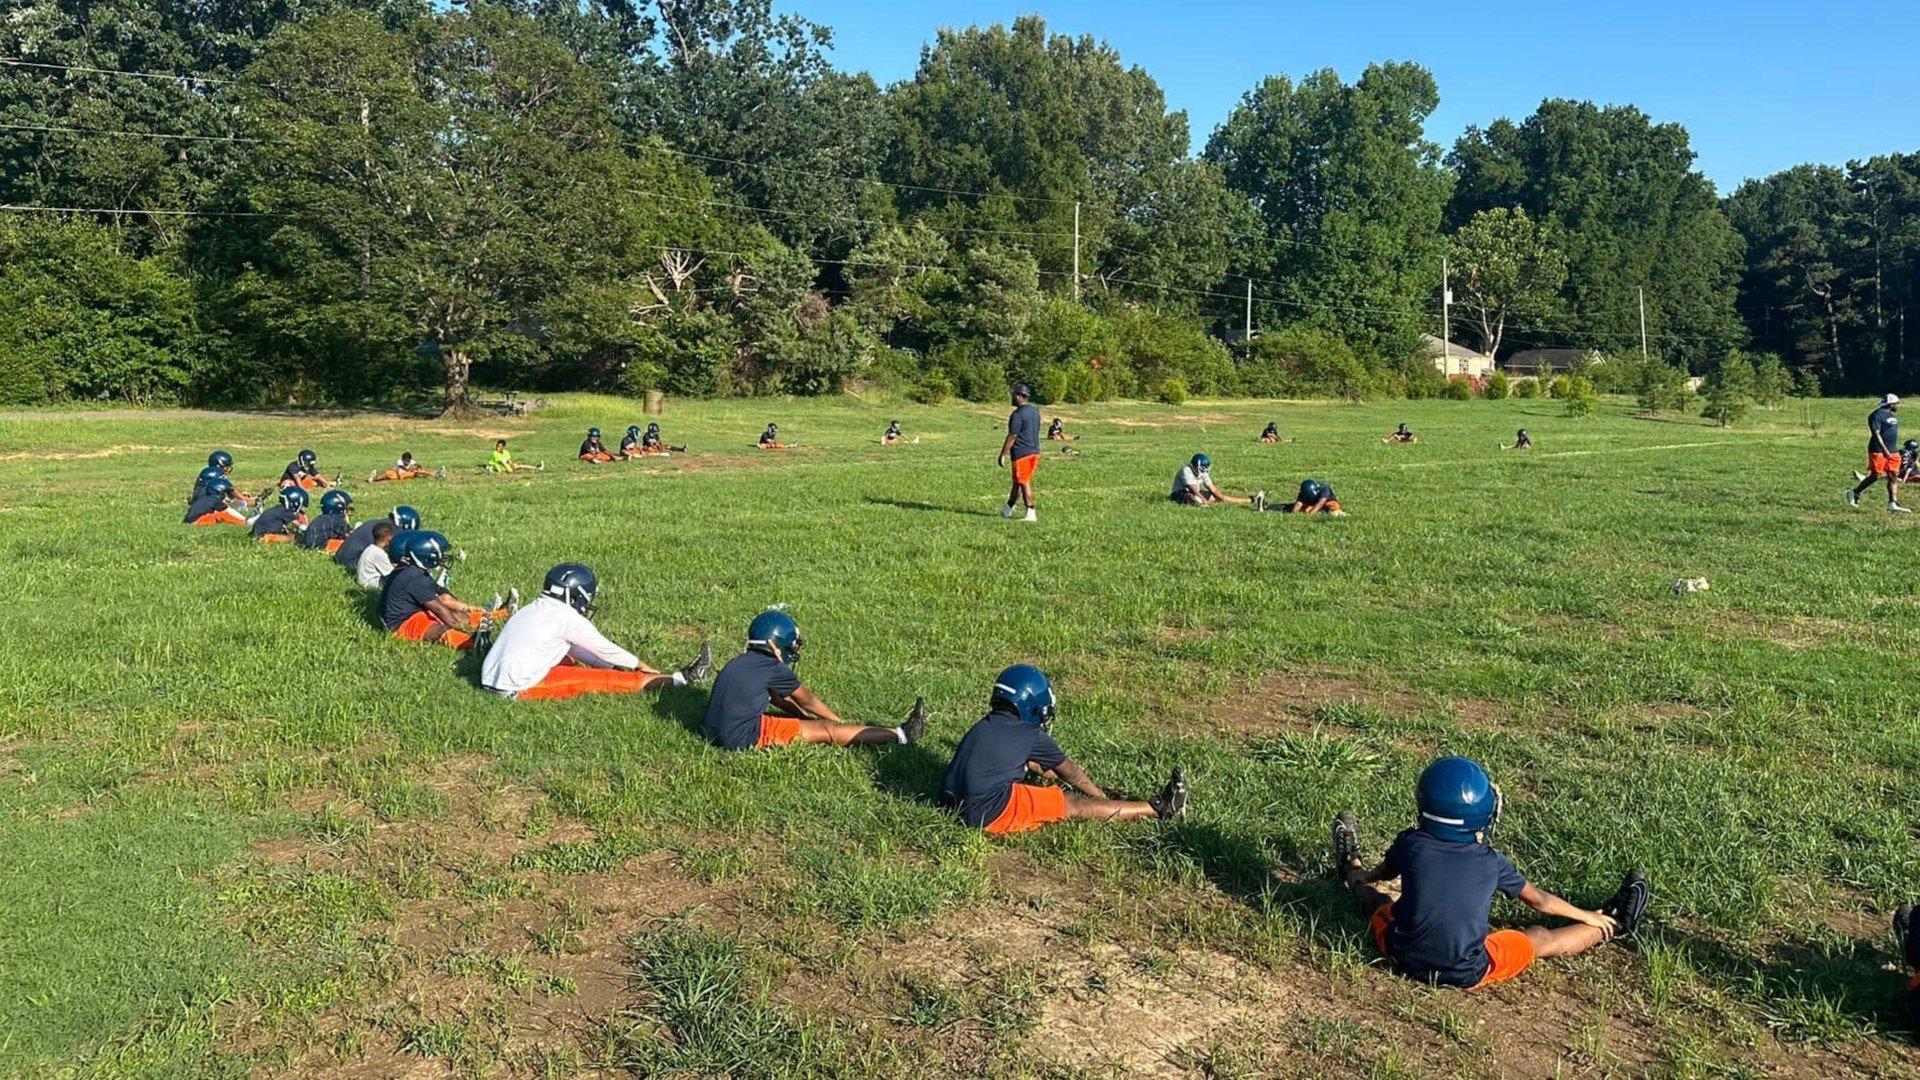 For the Mt. Moriah Roadrunners, football is more than just a game. It’s a unique way for police officers and pre-teens to build relationships.